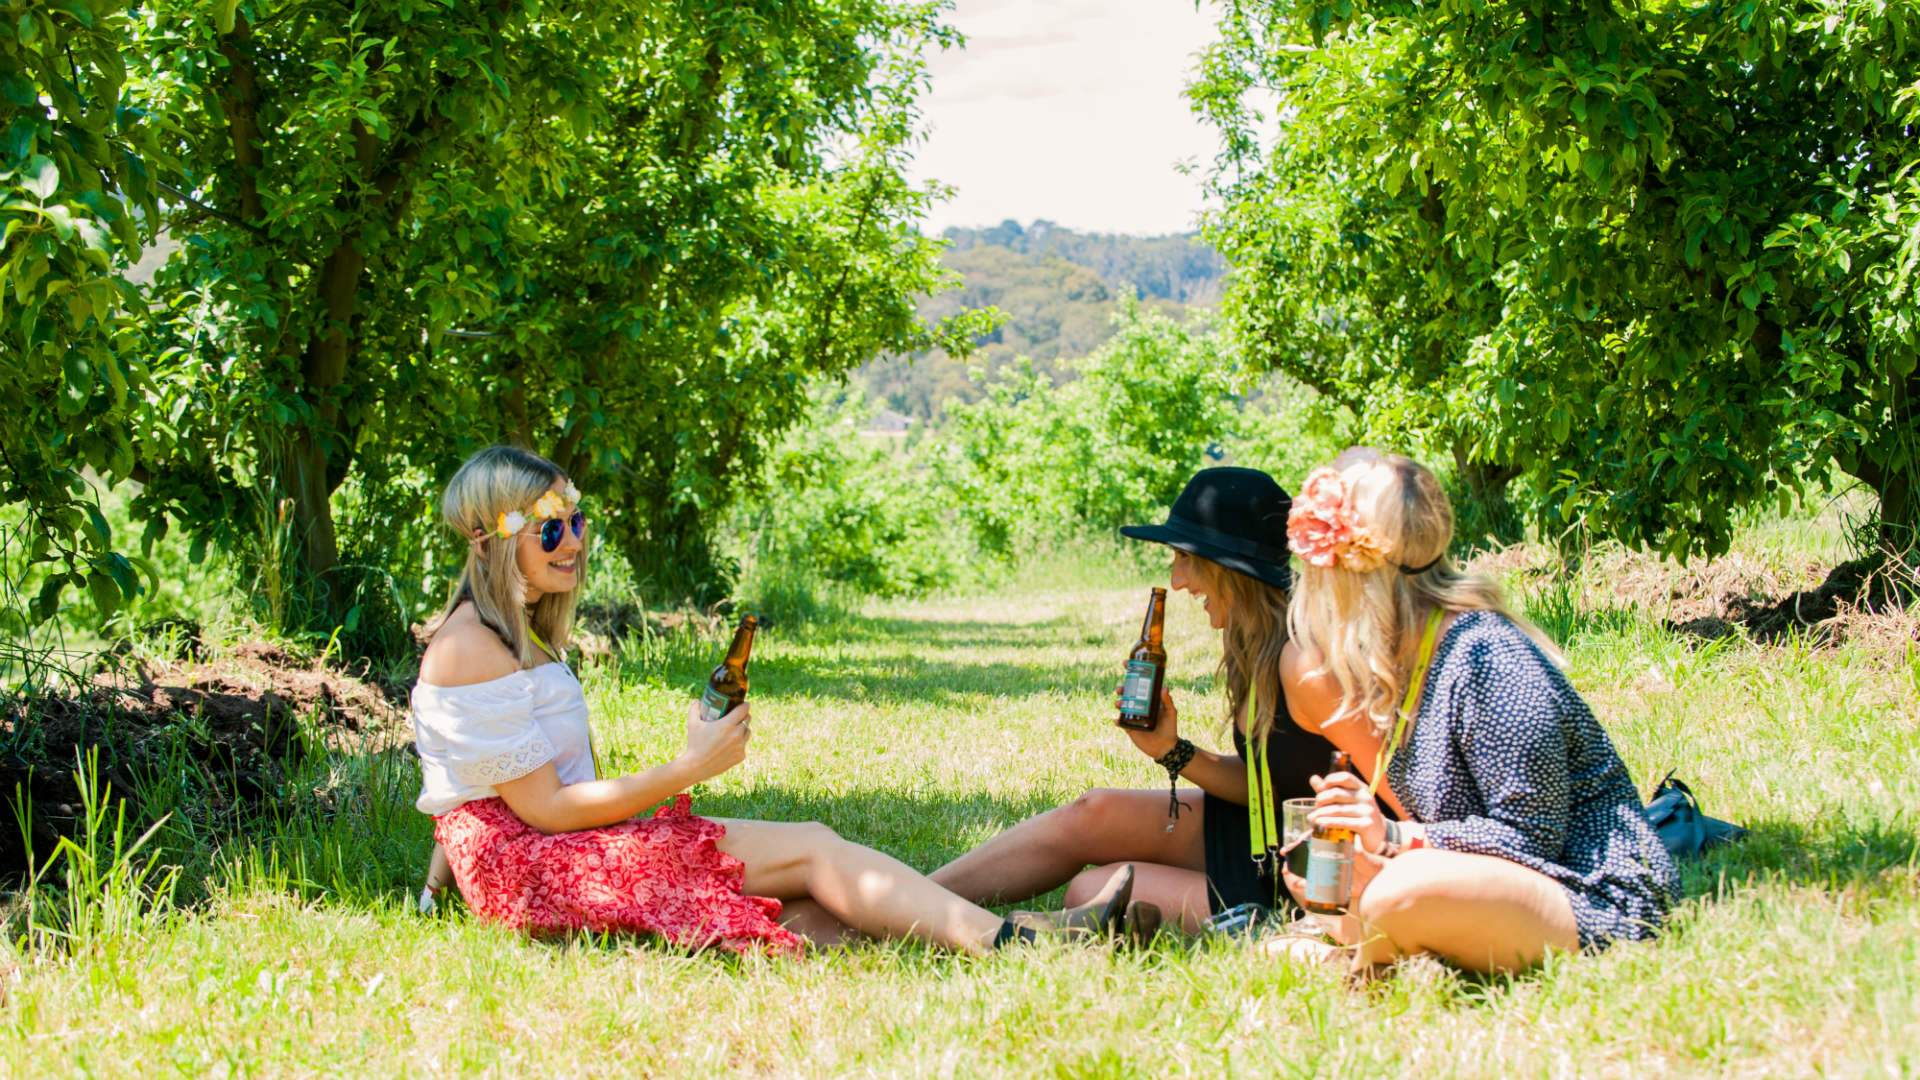 We're Giving Away a Tour Package to Peninsula VineHop Festival